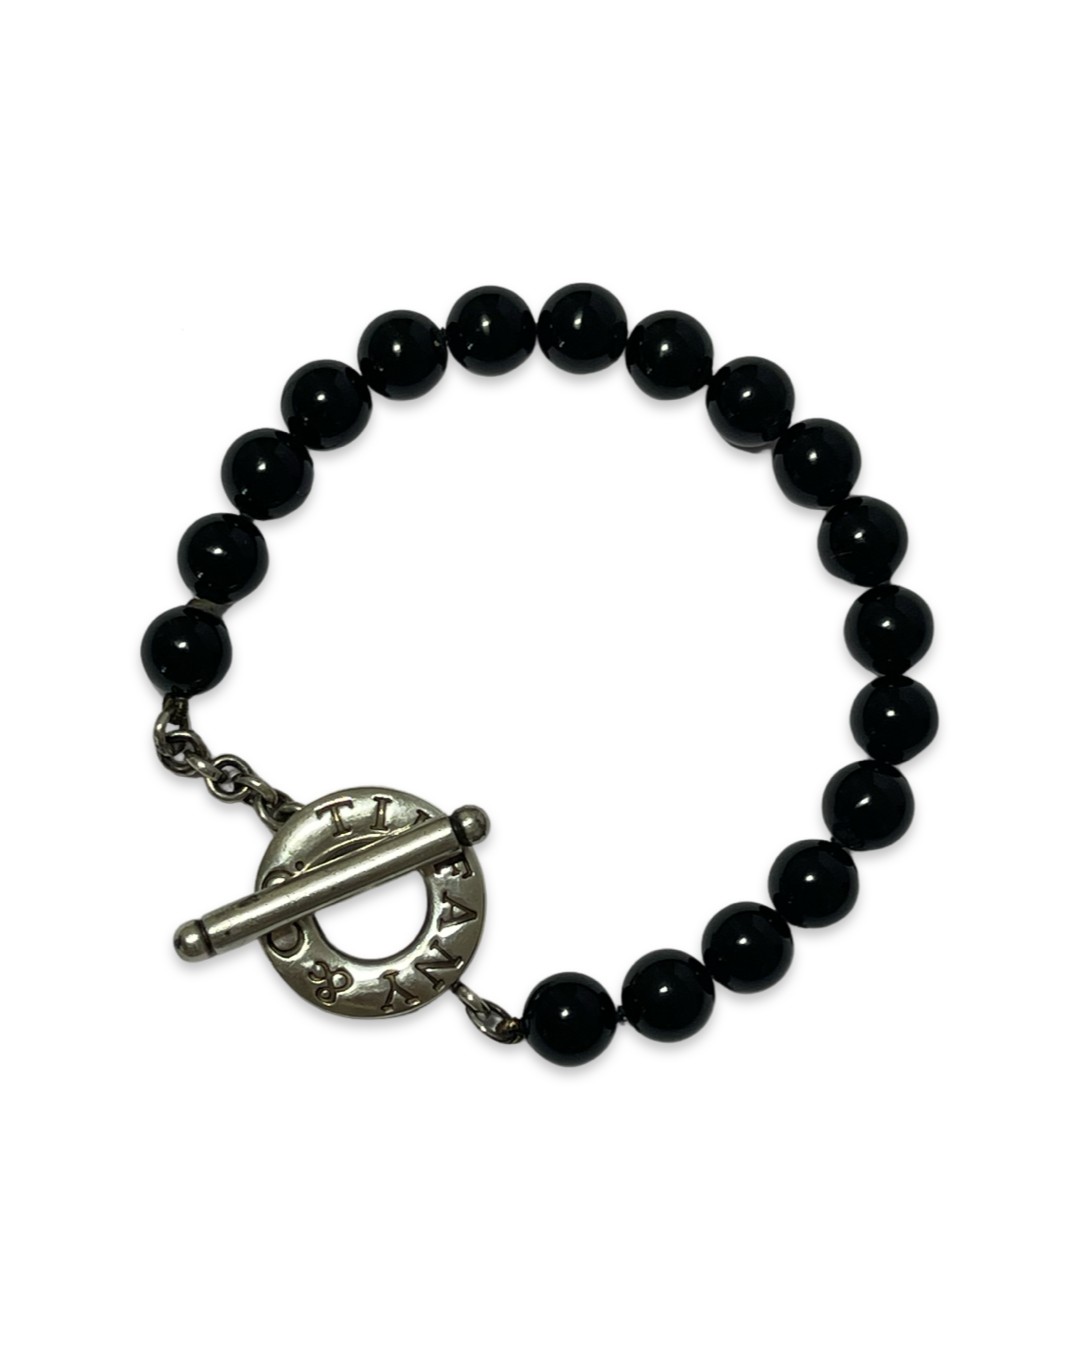 Tiffany & Co. Black Onyx Beaded Bracelet with Silver Clasp in original box weighing 23.75 grams - Image 2 of 6